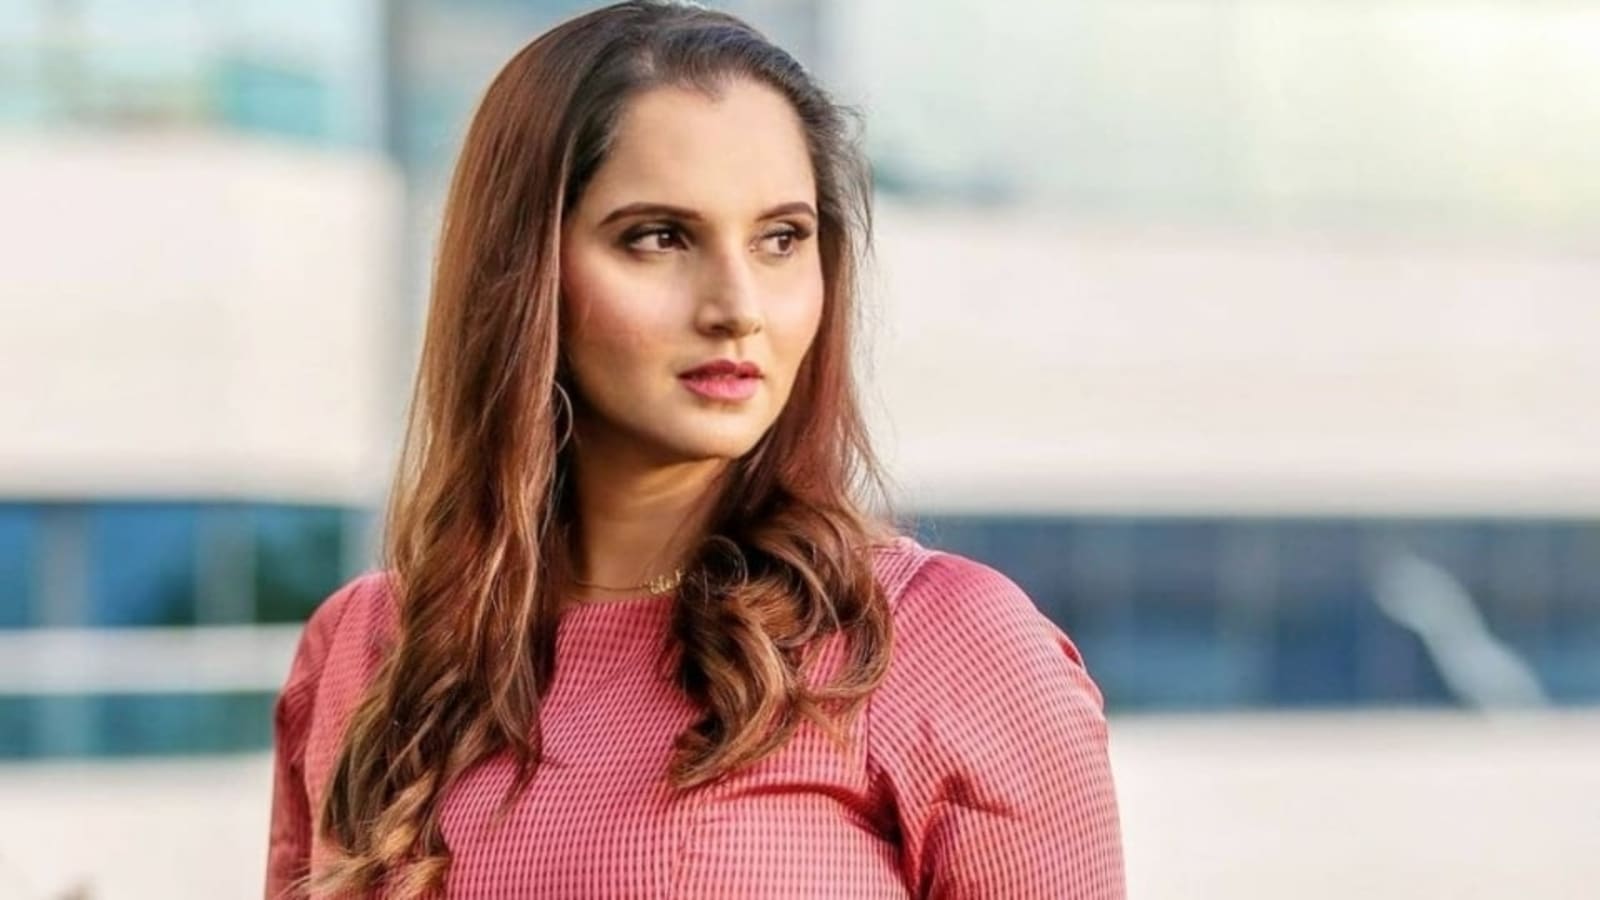 Sania Mirza Ka Video Bf - Sania Mirza shares sweet picture with son Izhaan. Sonu Sood hearts post |  Trending - Hindustan Times